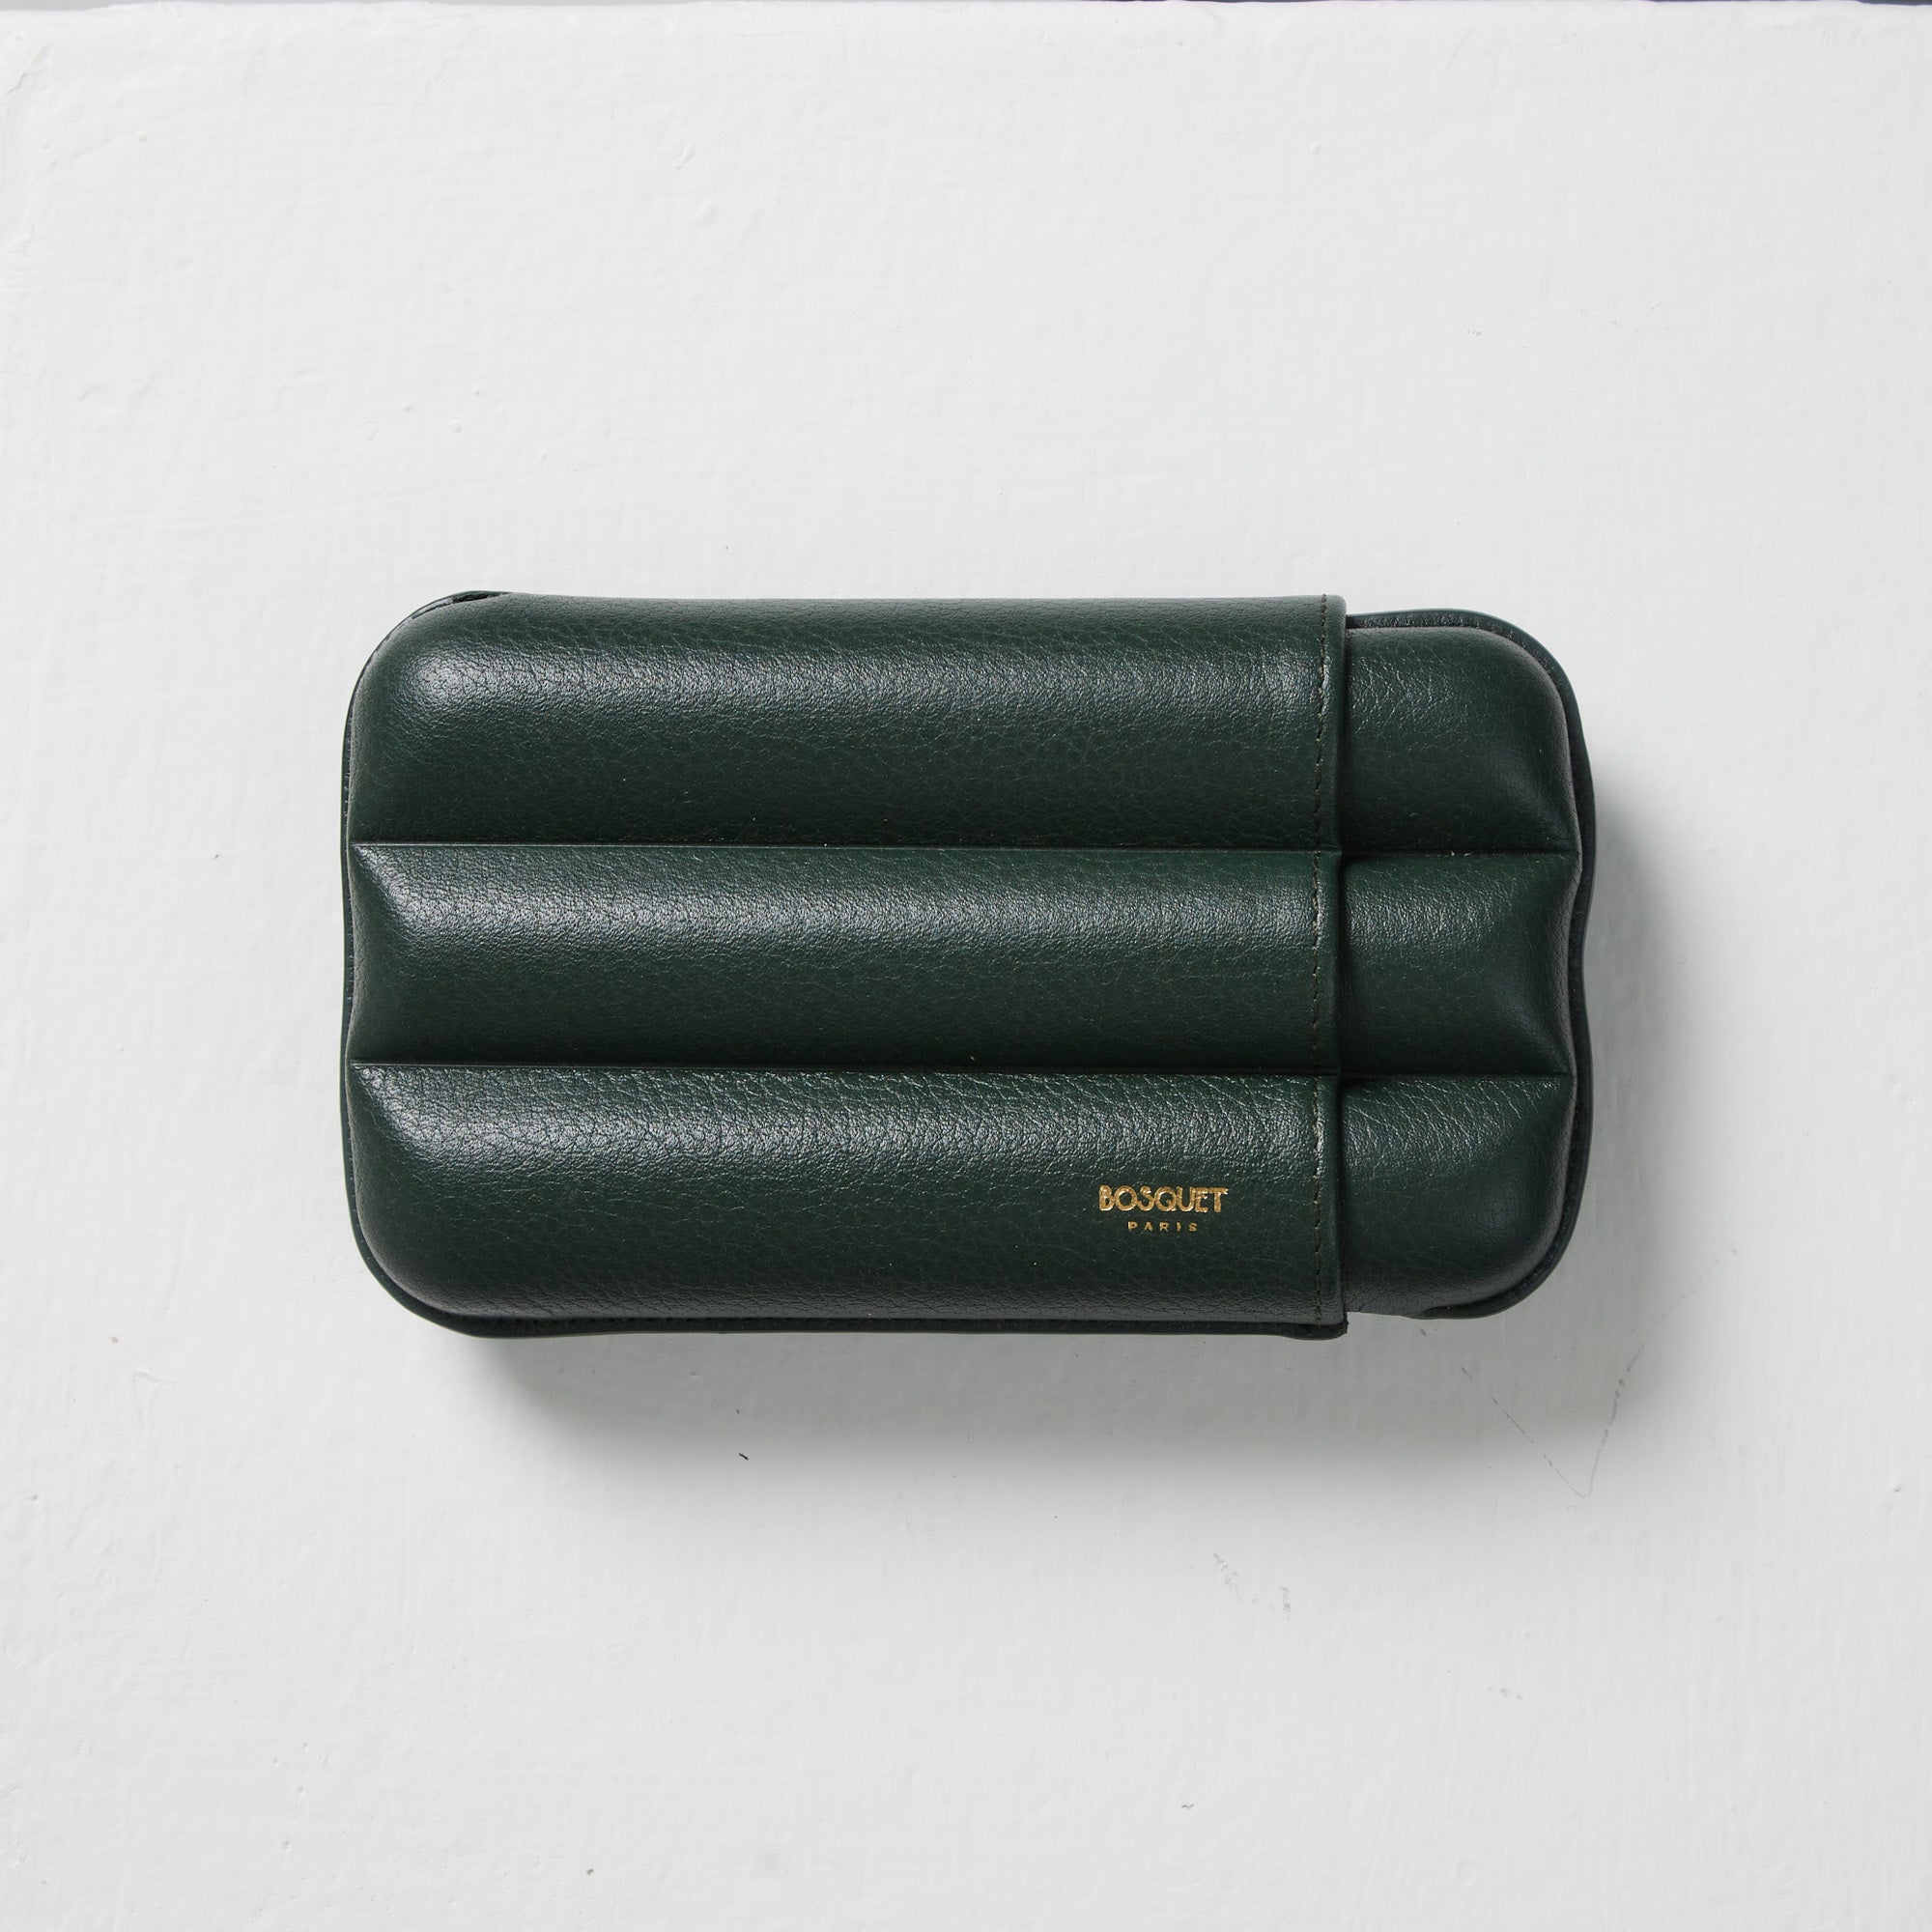 A green leather Bosque cigar case on a white surface.